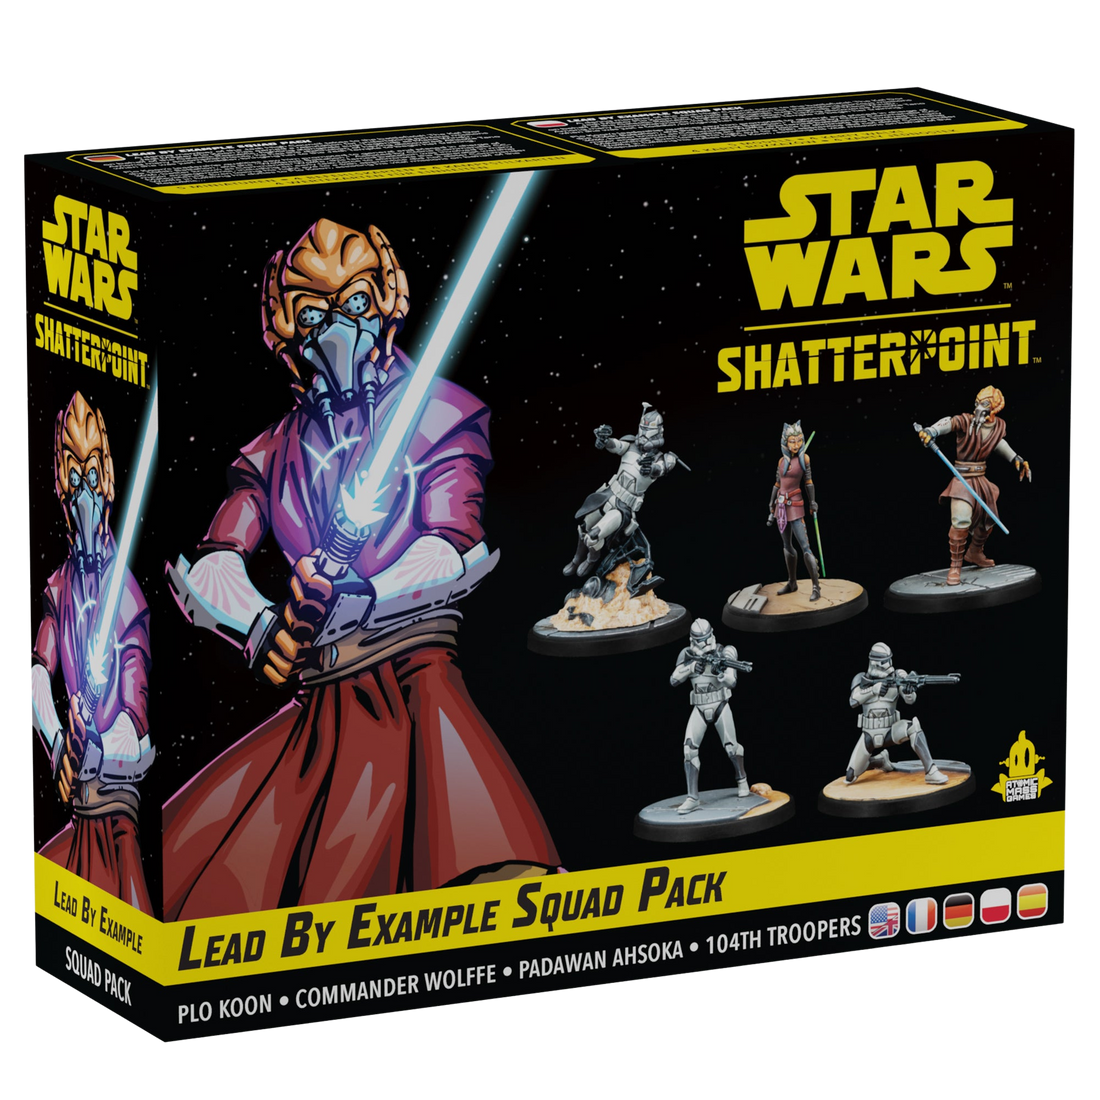 Star Wars: Shatterpoint - Lead by Example Squad Pack